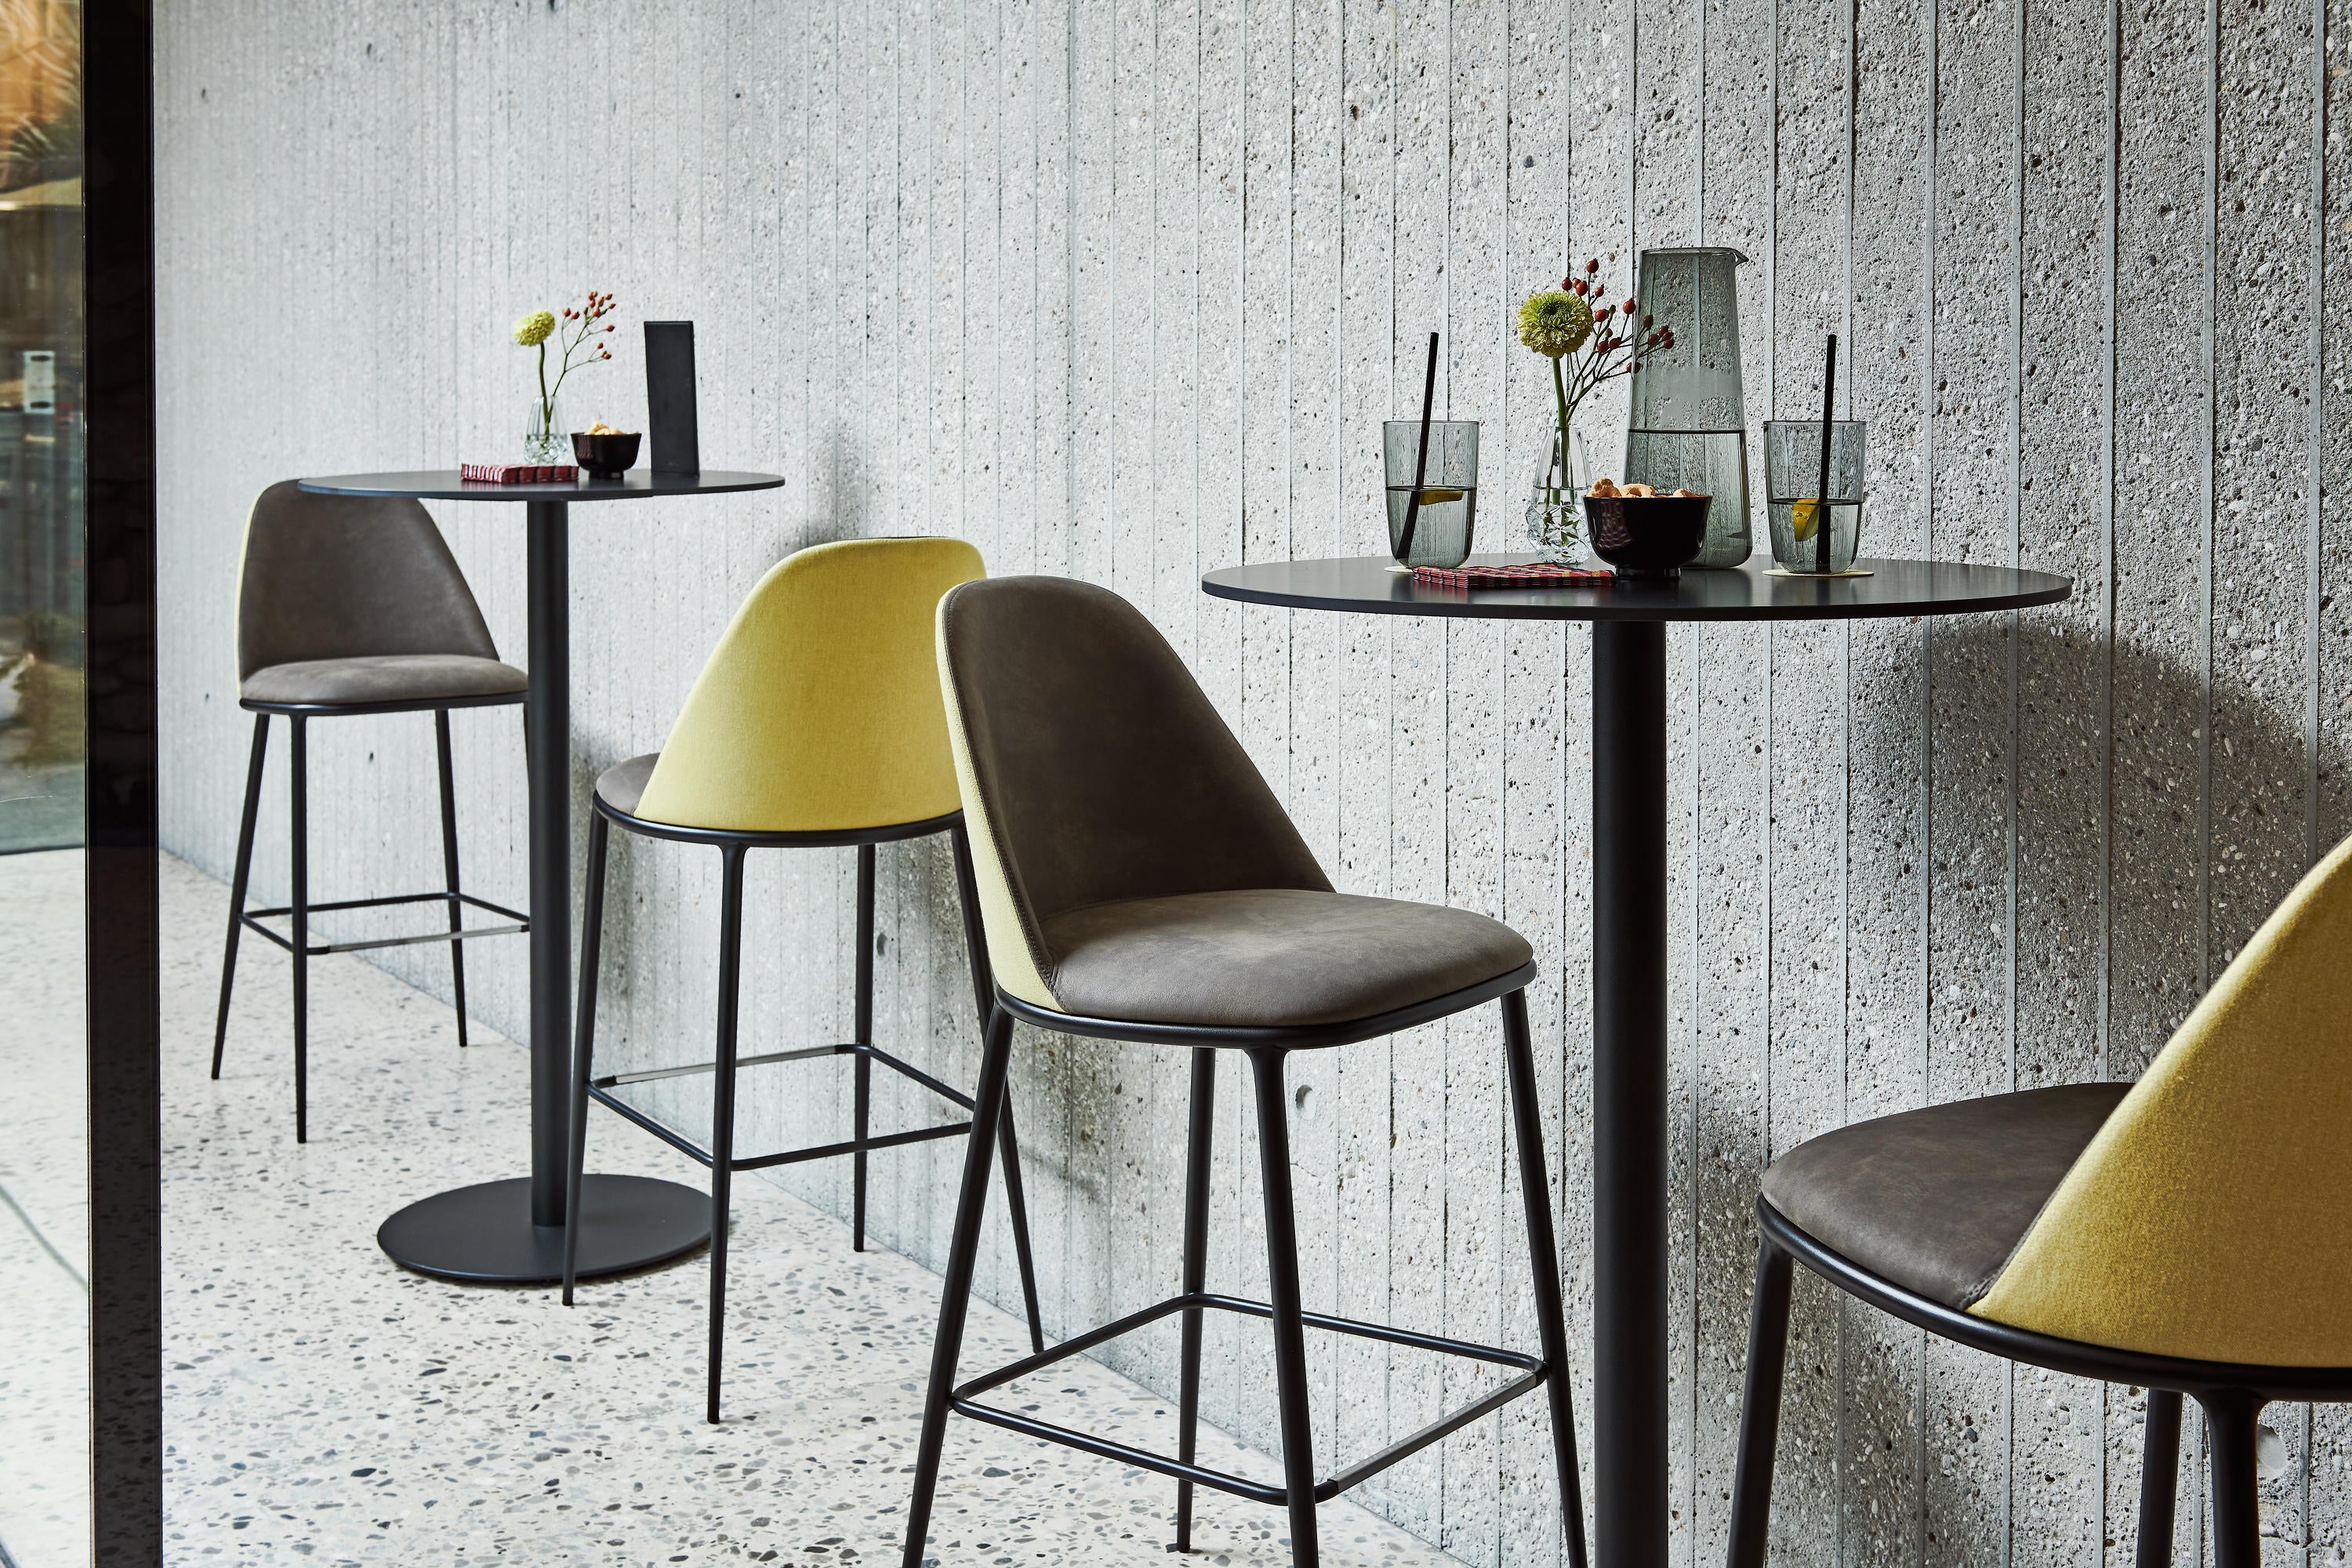  Luxury Bar Stools in Commercial Spaces